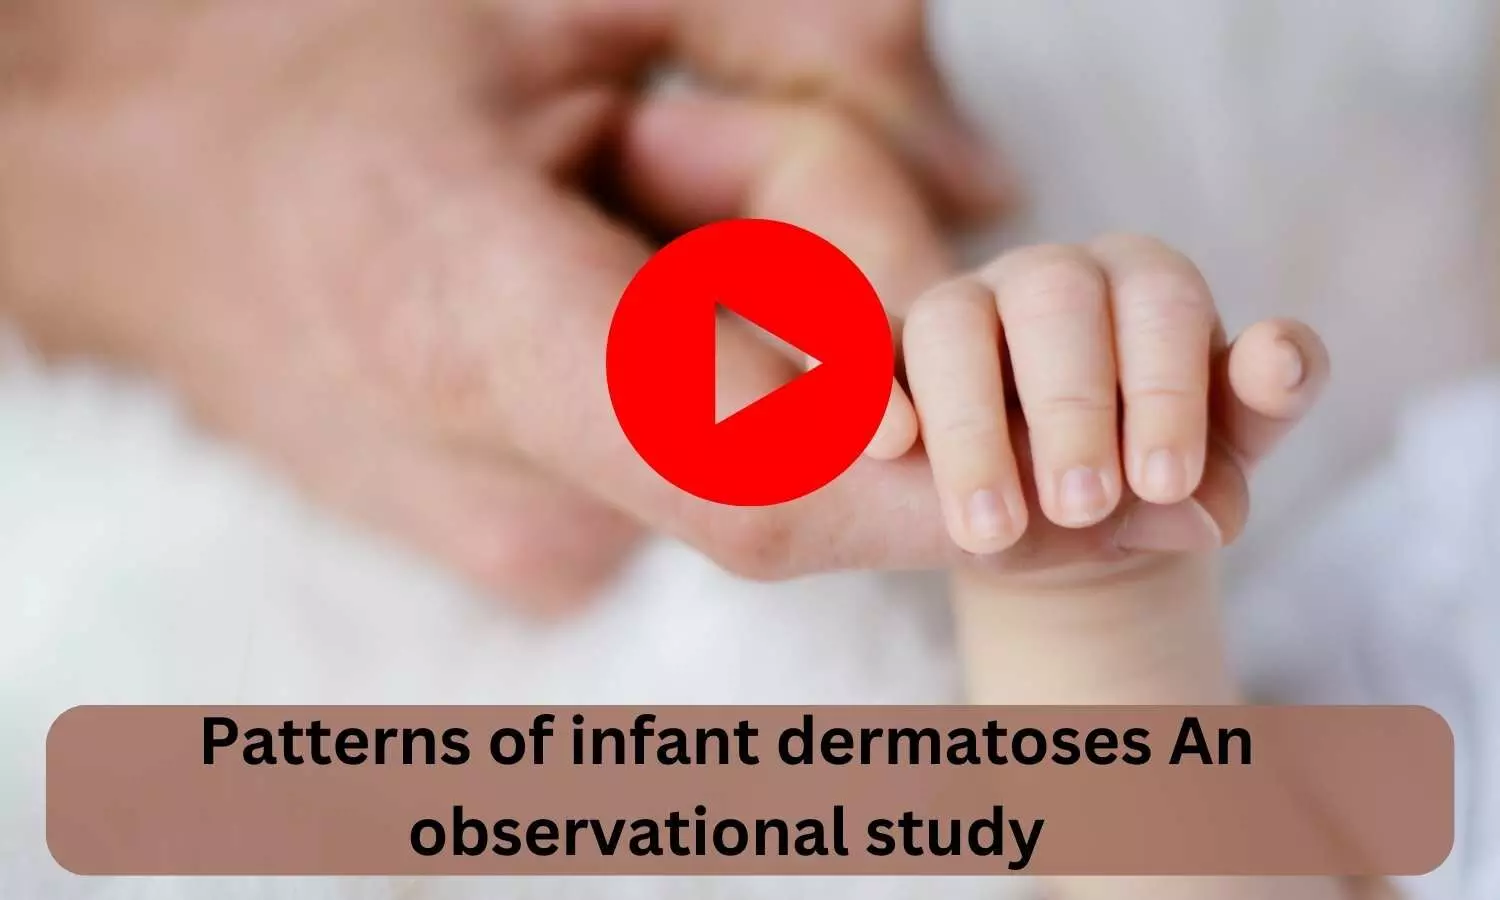 Patterns of infant dermatoses An observational study